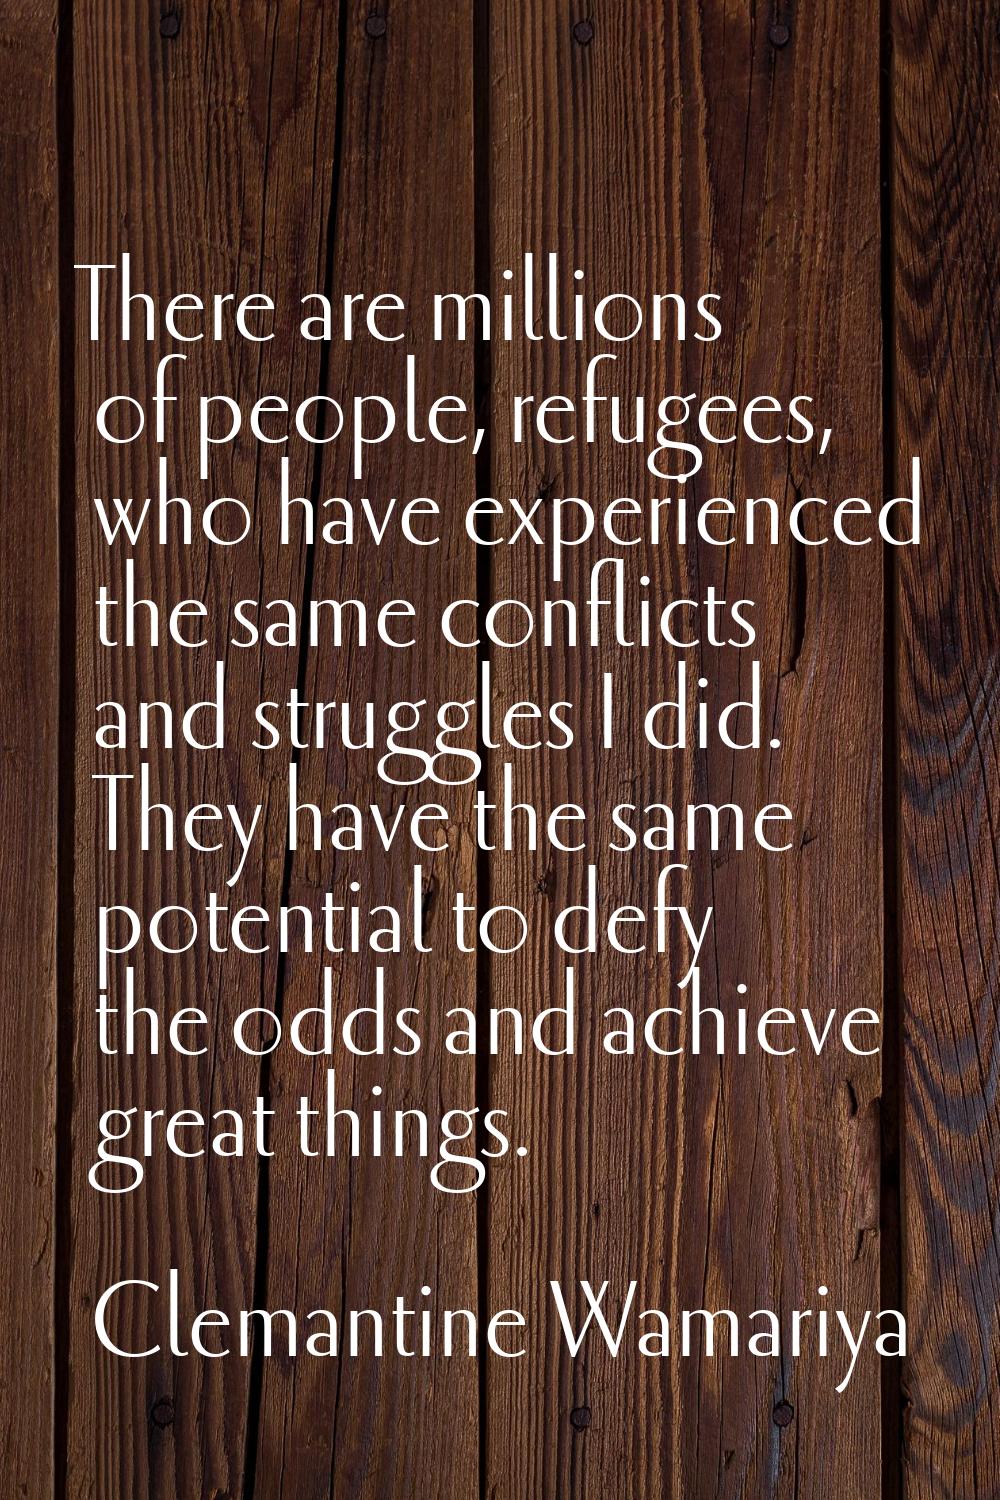 There are millions of people, refugees, who have experienced the same conflicts and struggles I did